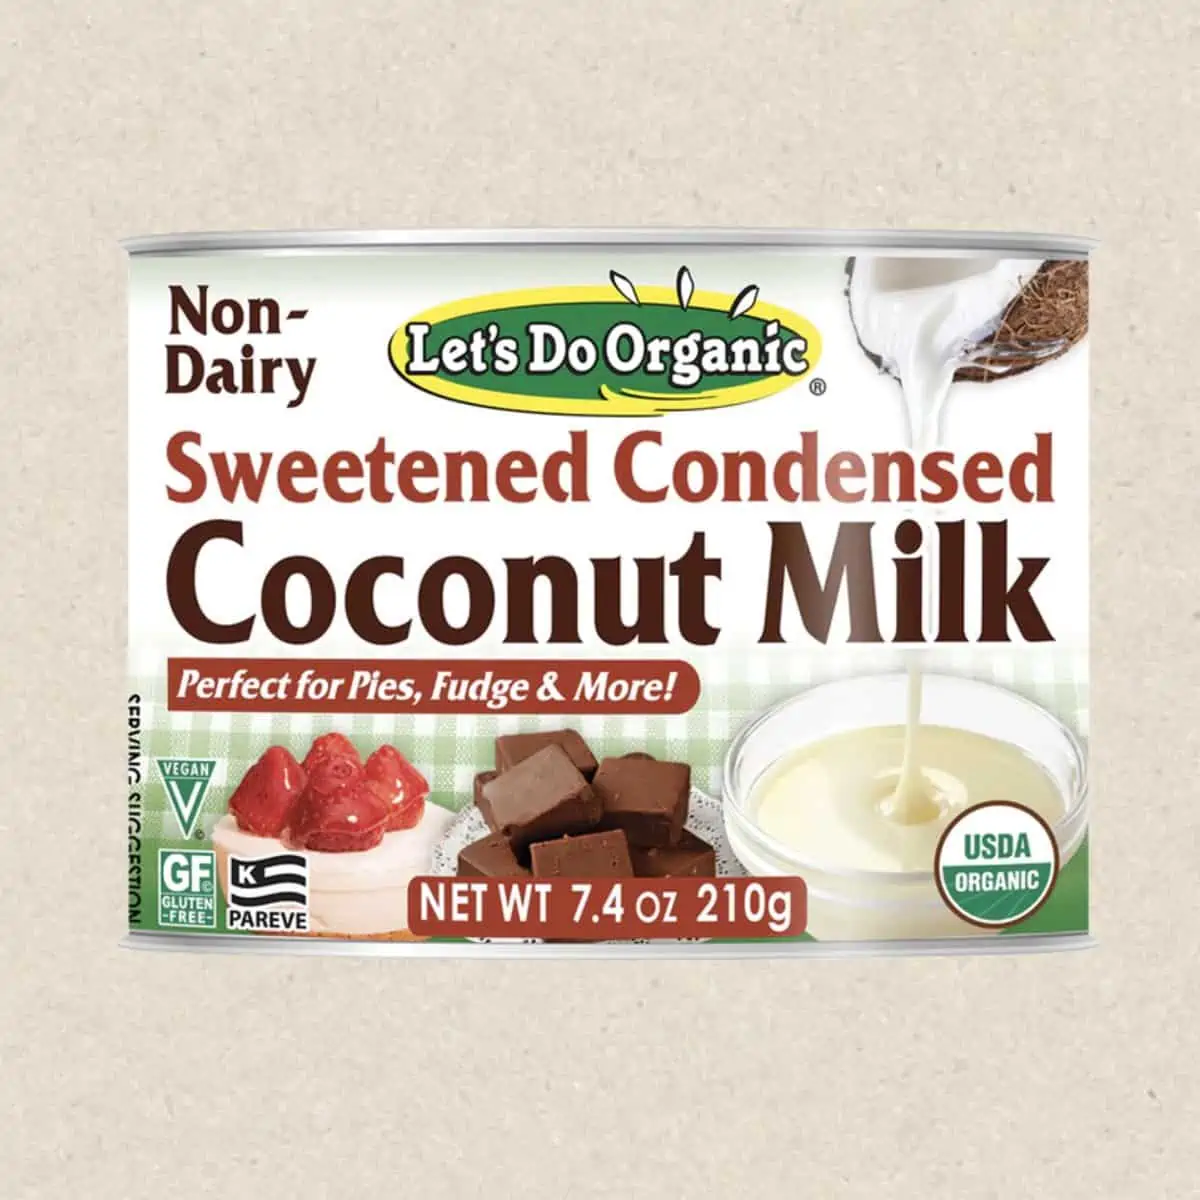 tin can of non-dairy sweetened condensed coconut milk from the brand lets do organic